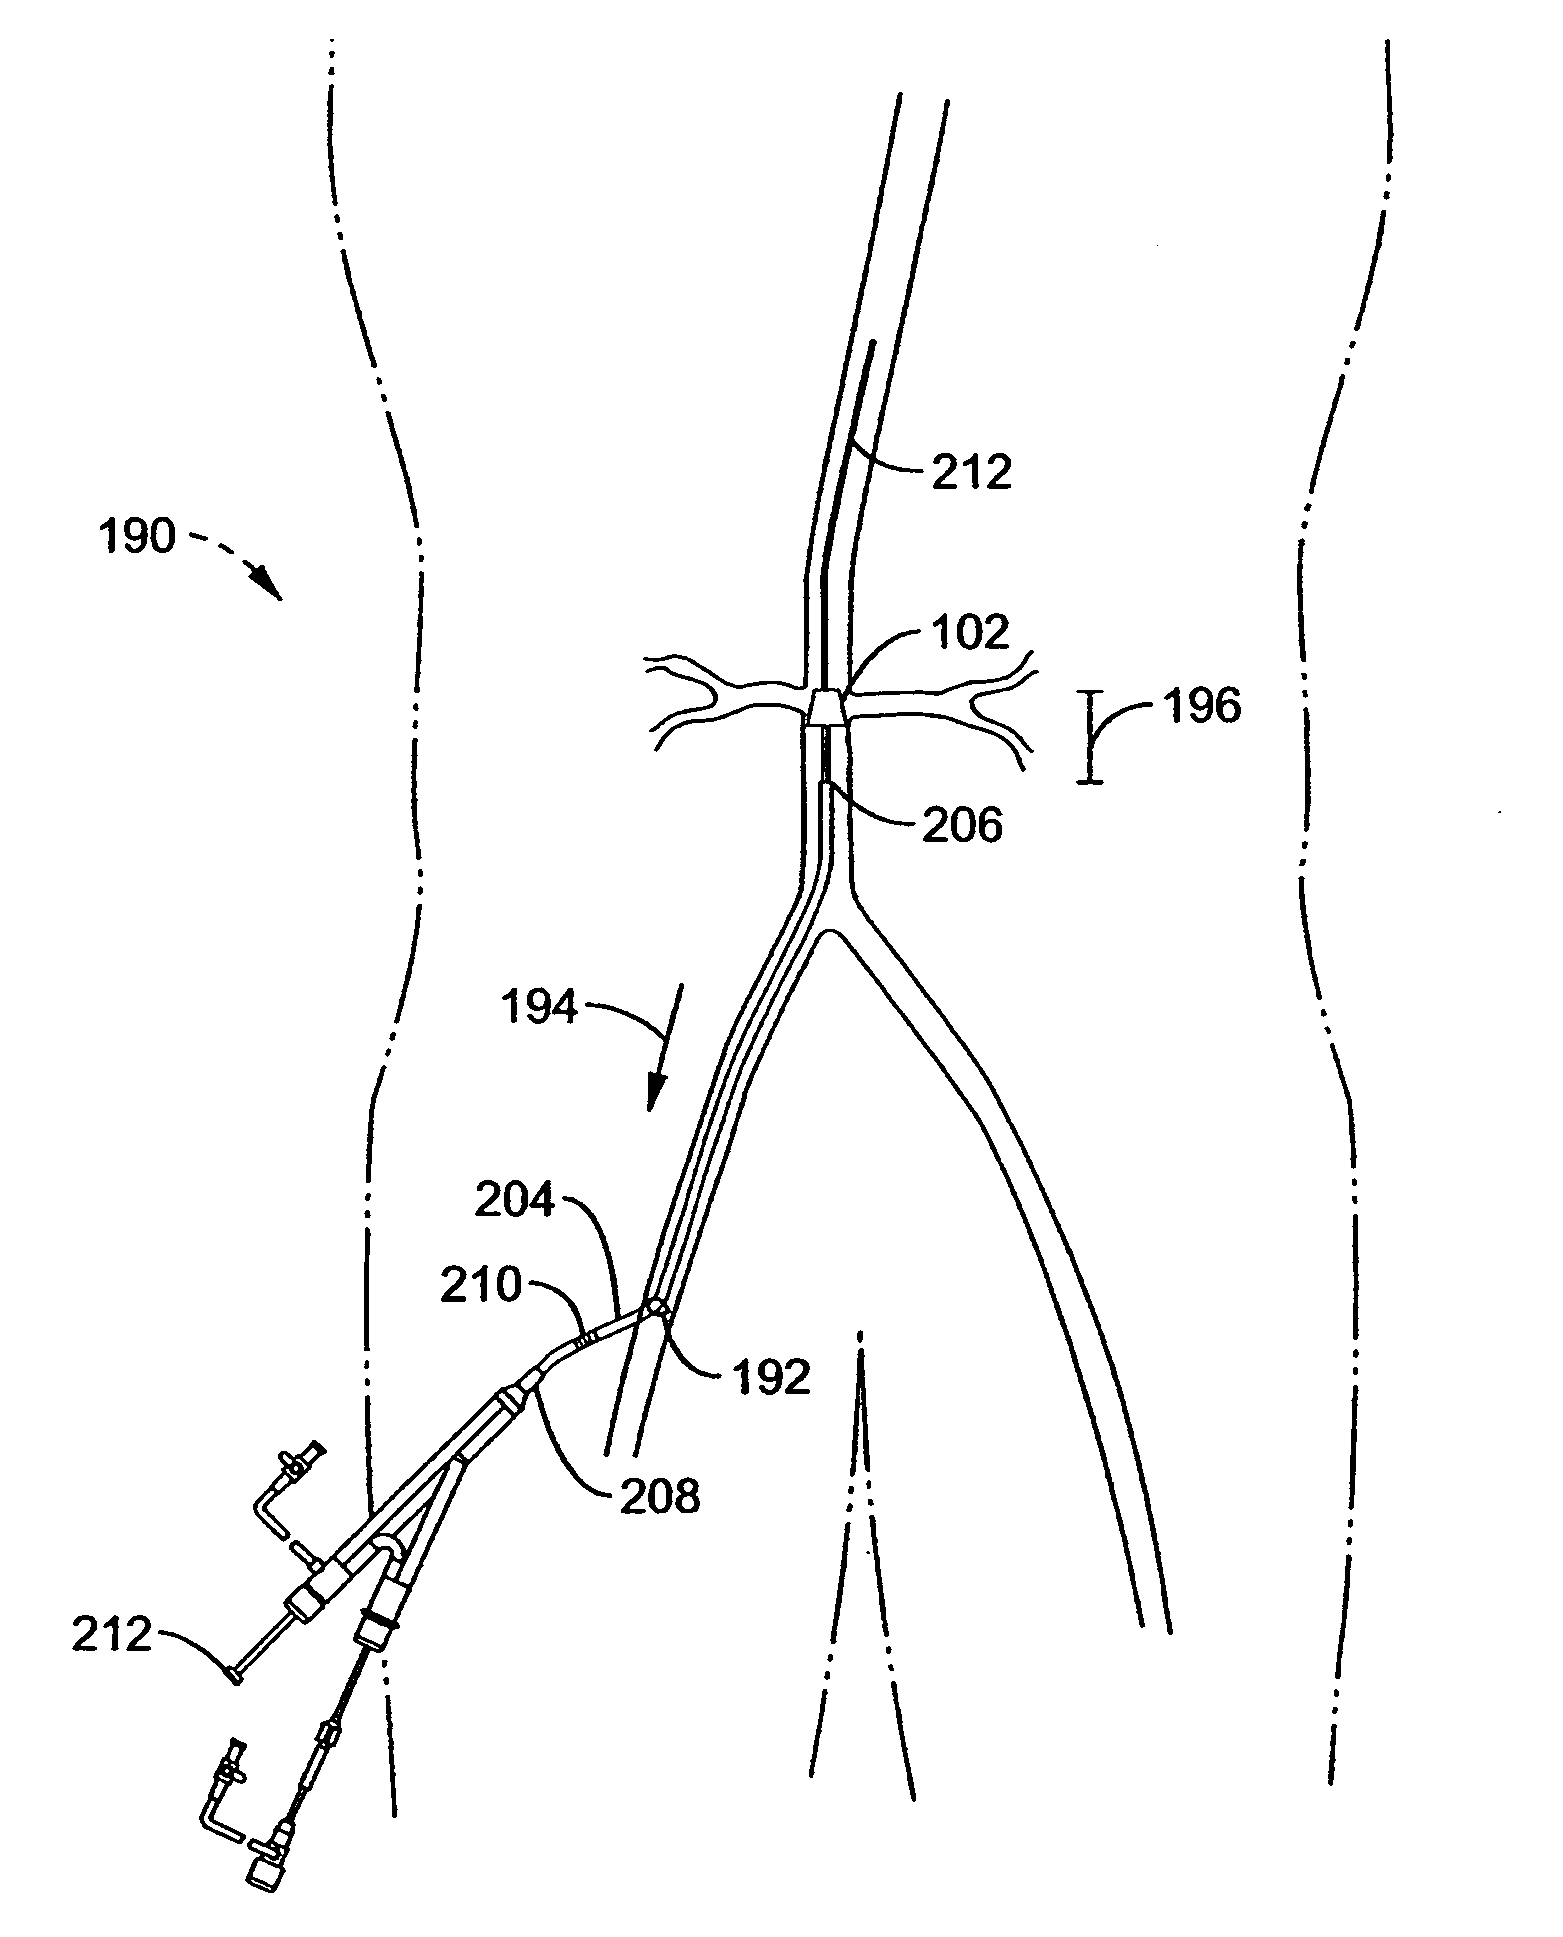 Apparatus and method for inserting an intra-aorta catheter through a delivery sheath